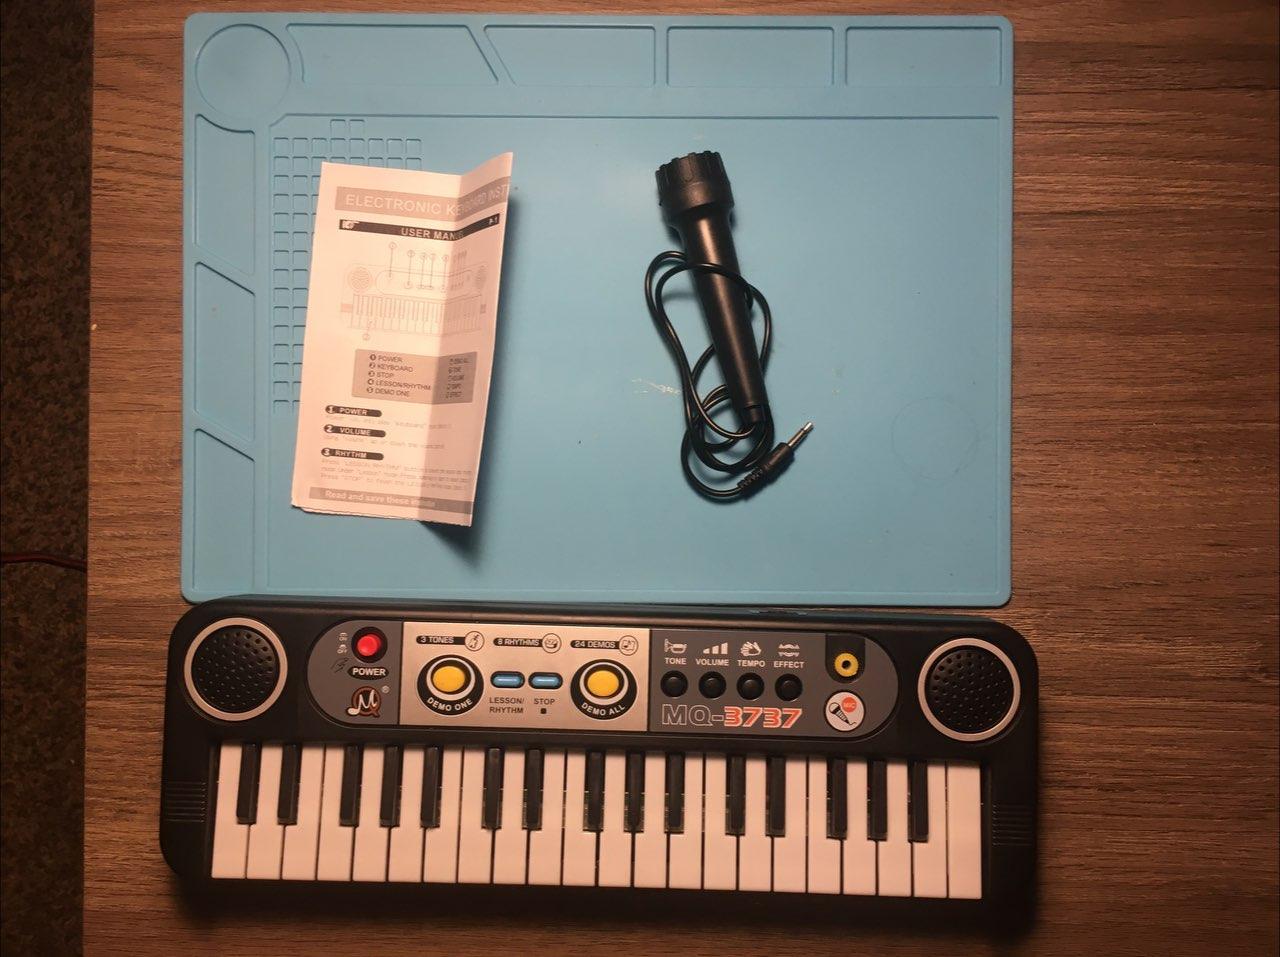 The keyboard, the included microphone, and the owner's manual